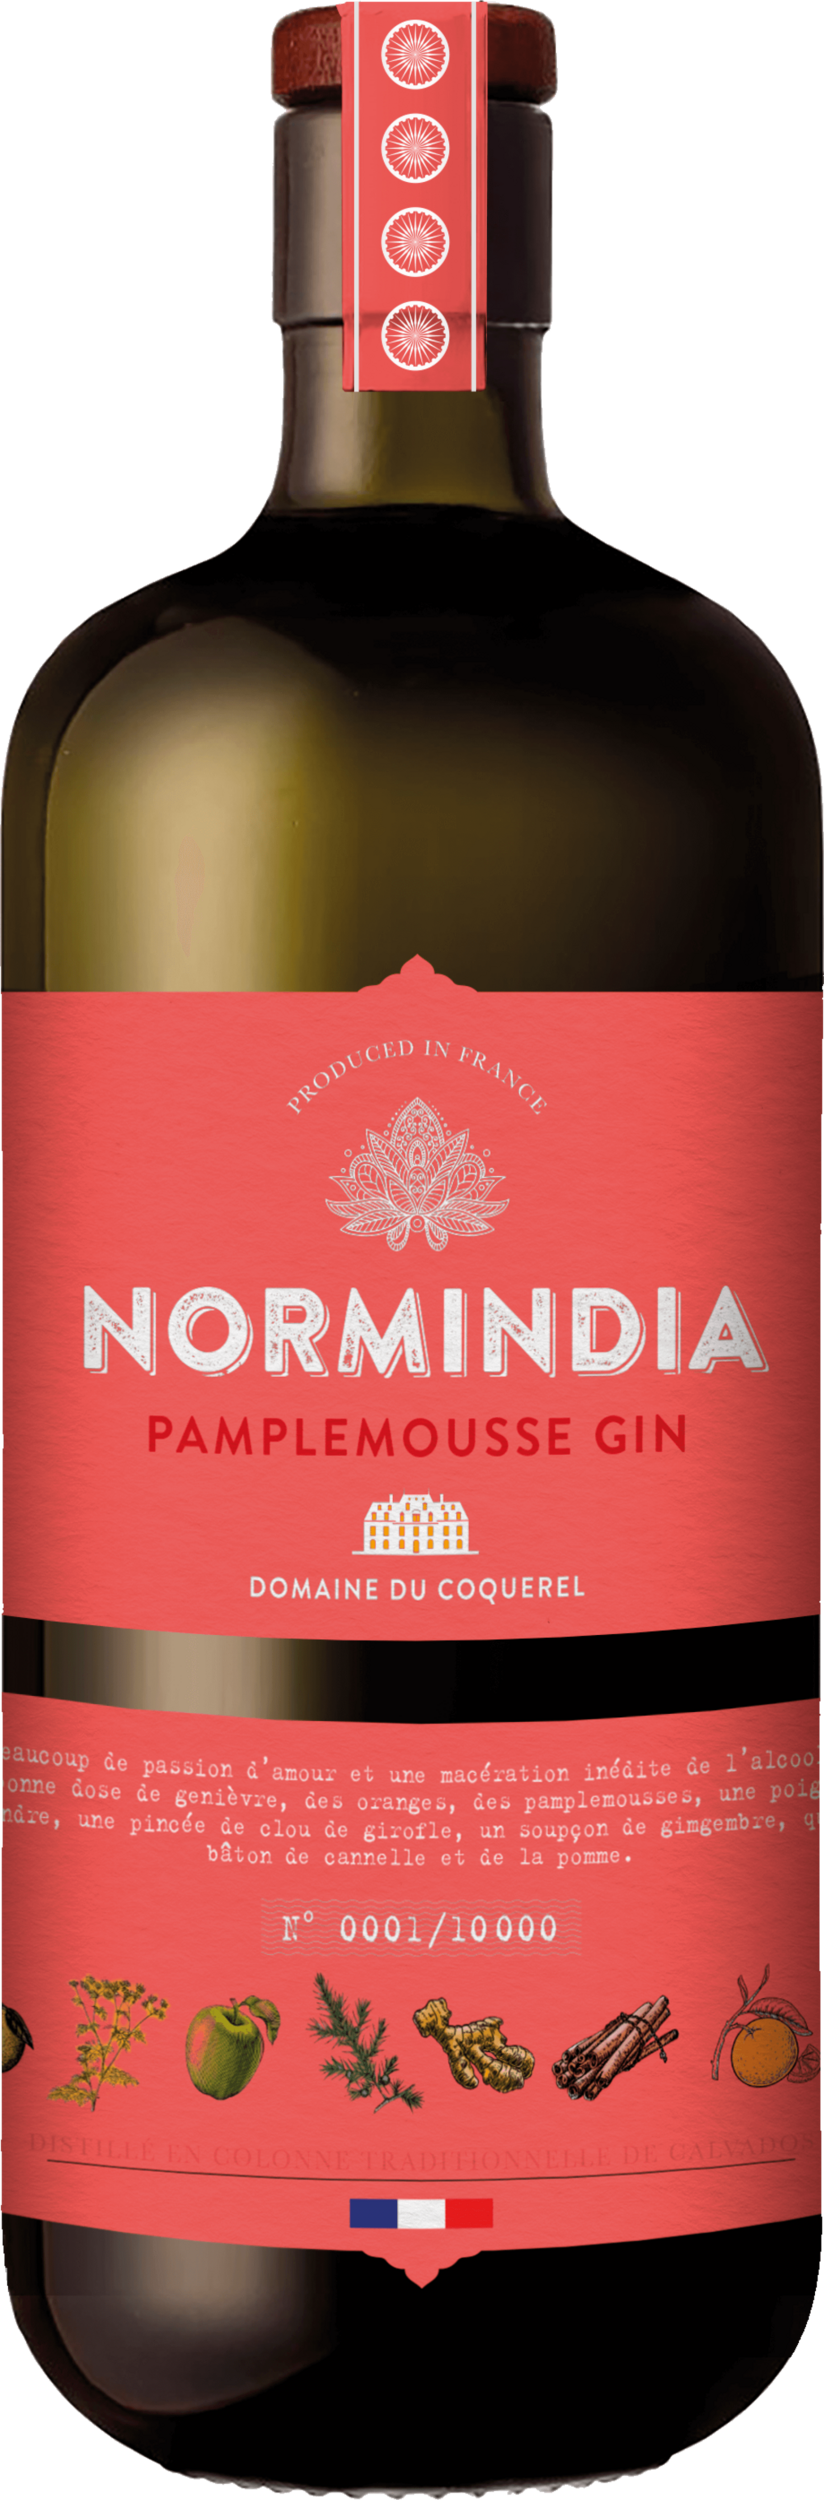 Normindia Pamplemousse